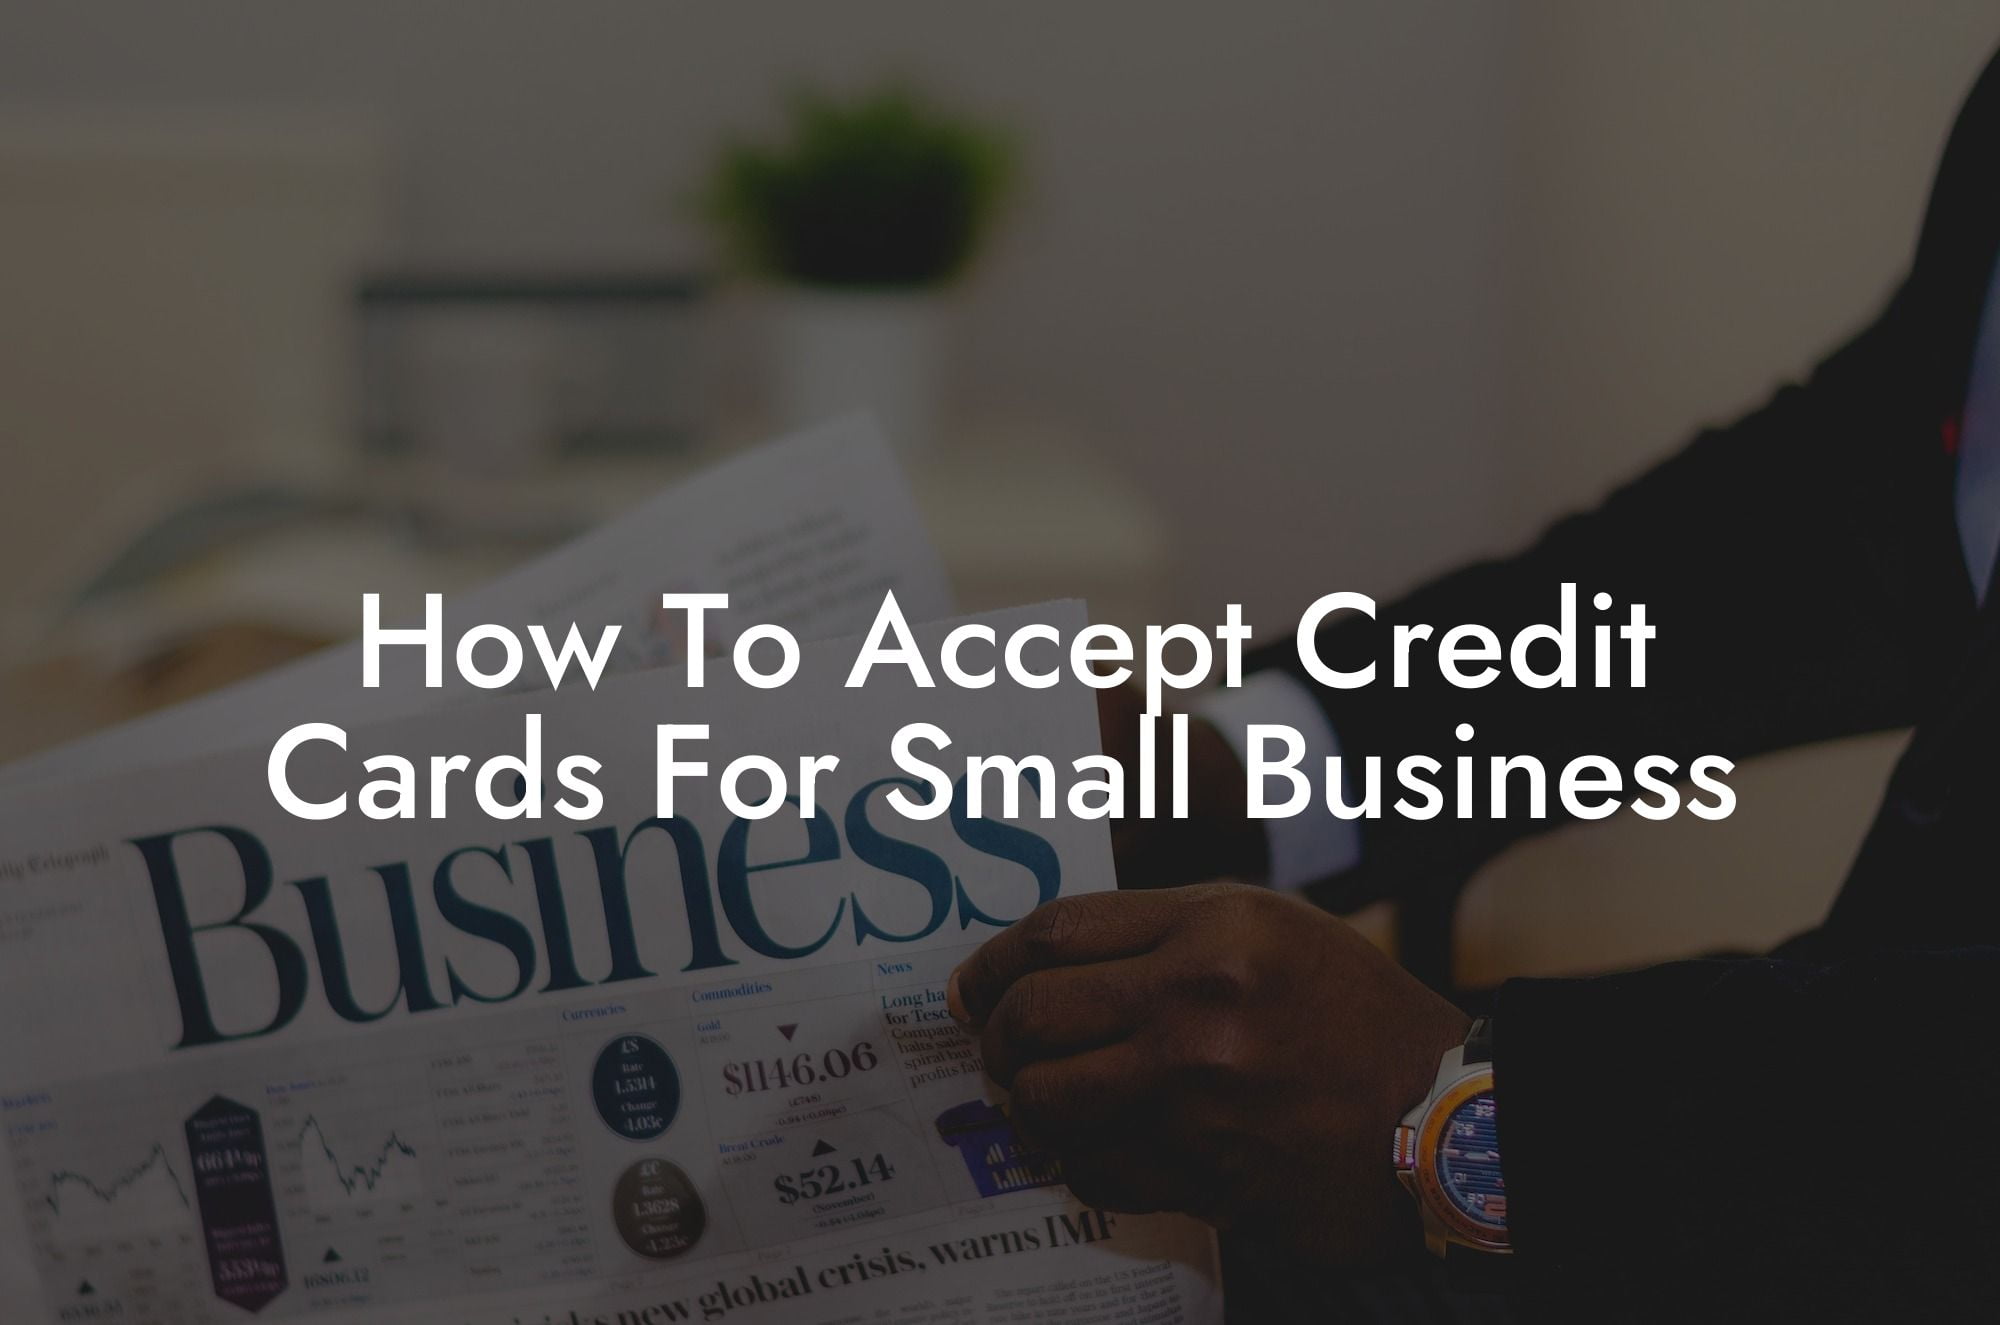 How To Accept Credit Cards For Small Business